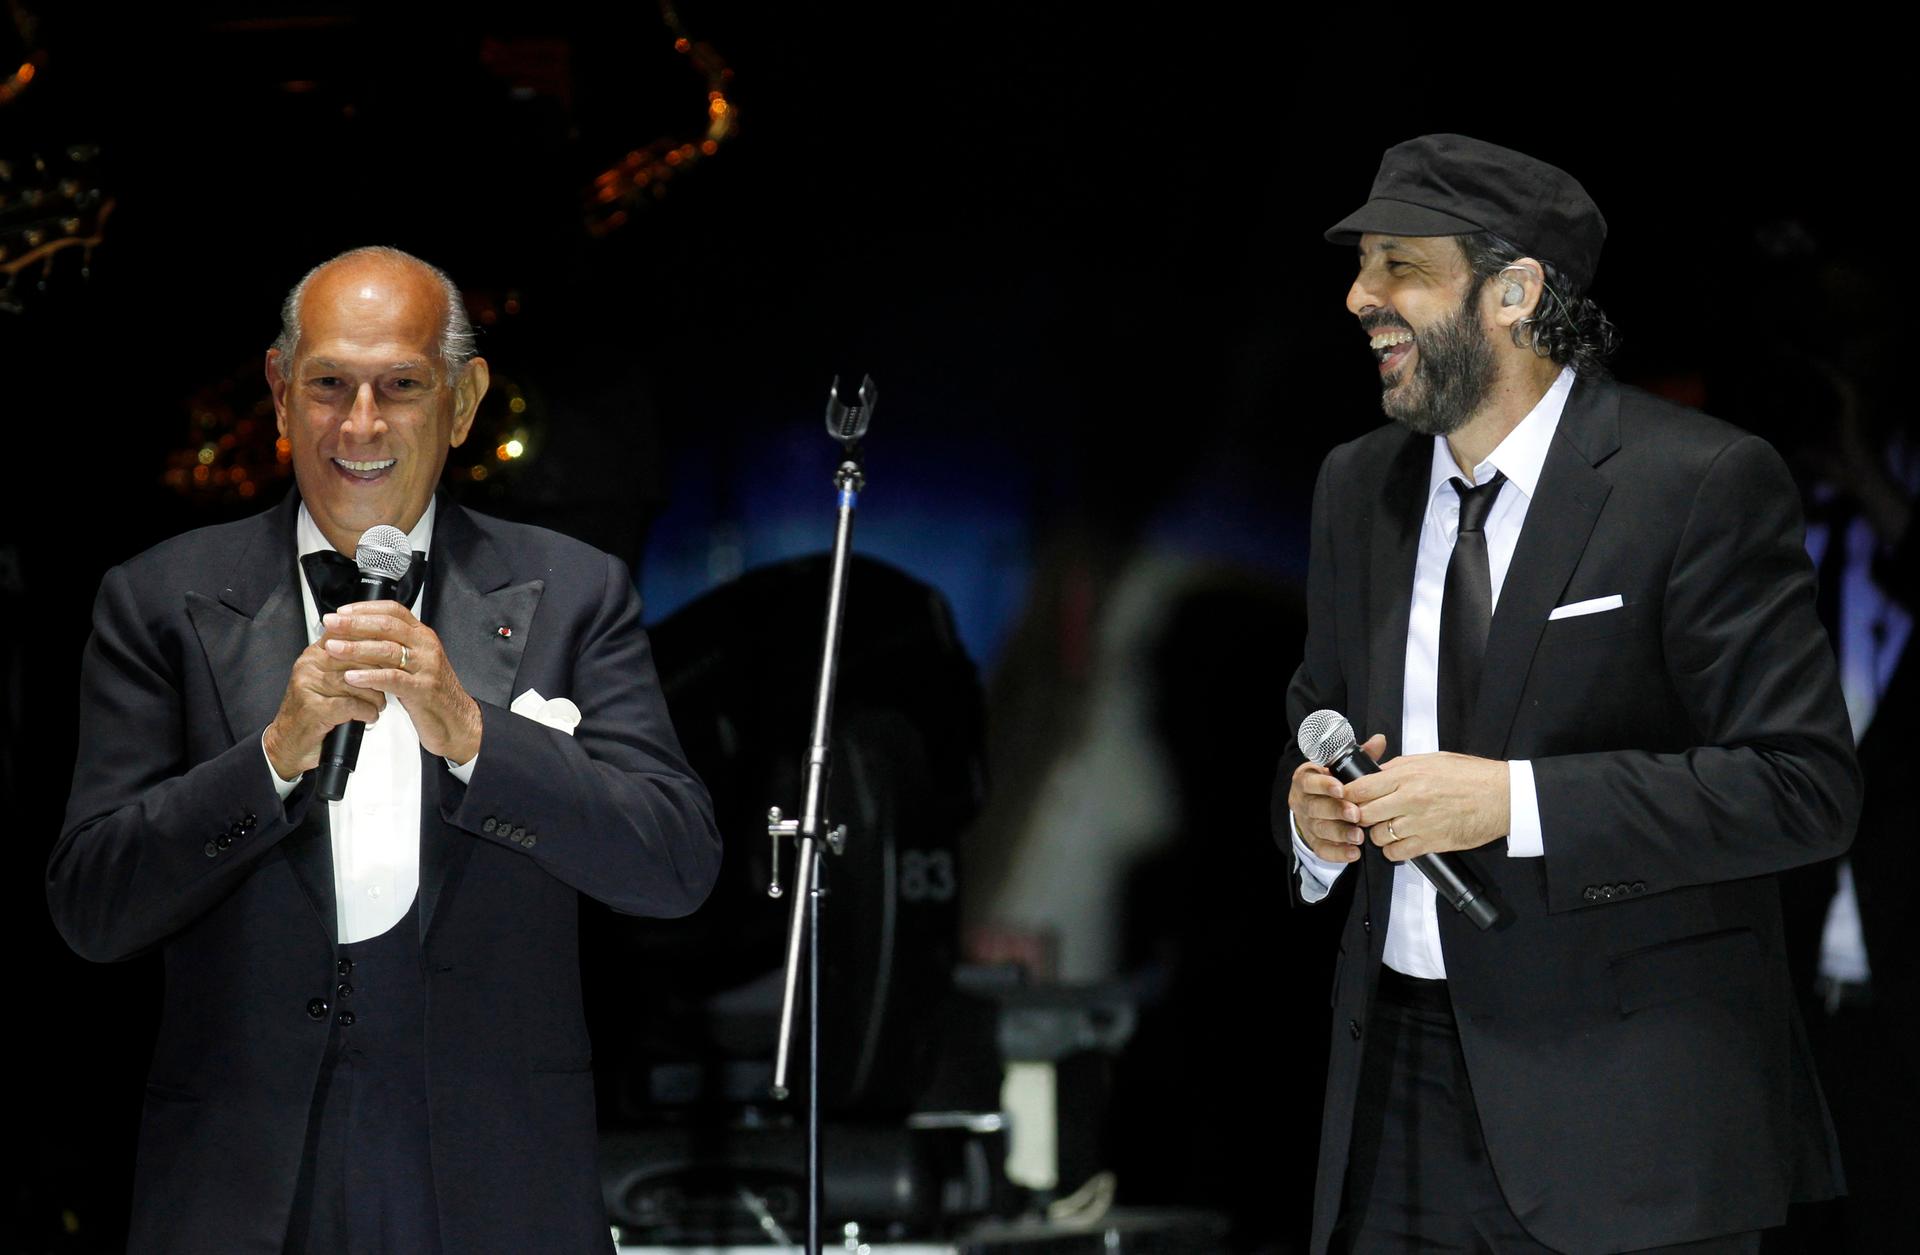 Designer Oscar de la Renta addresses the audience next to singer Juan Luis Guerra during a presentation of his collection in Mexico City in 2011.